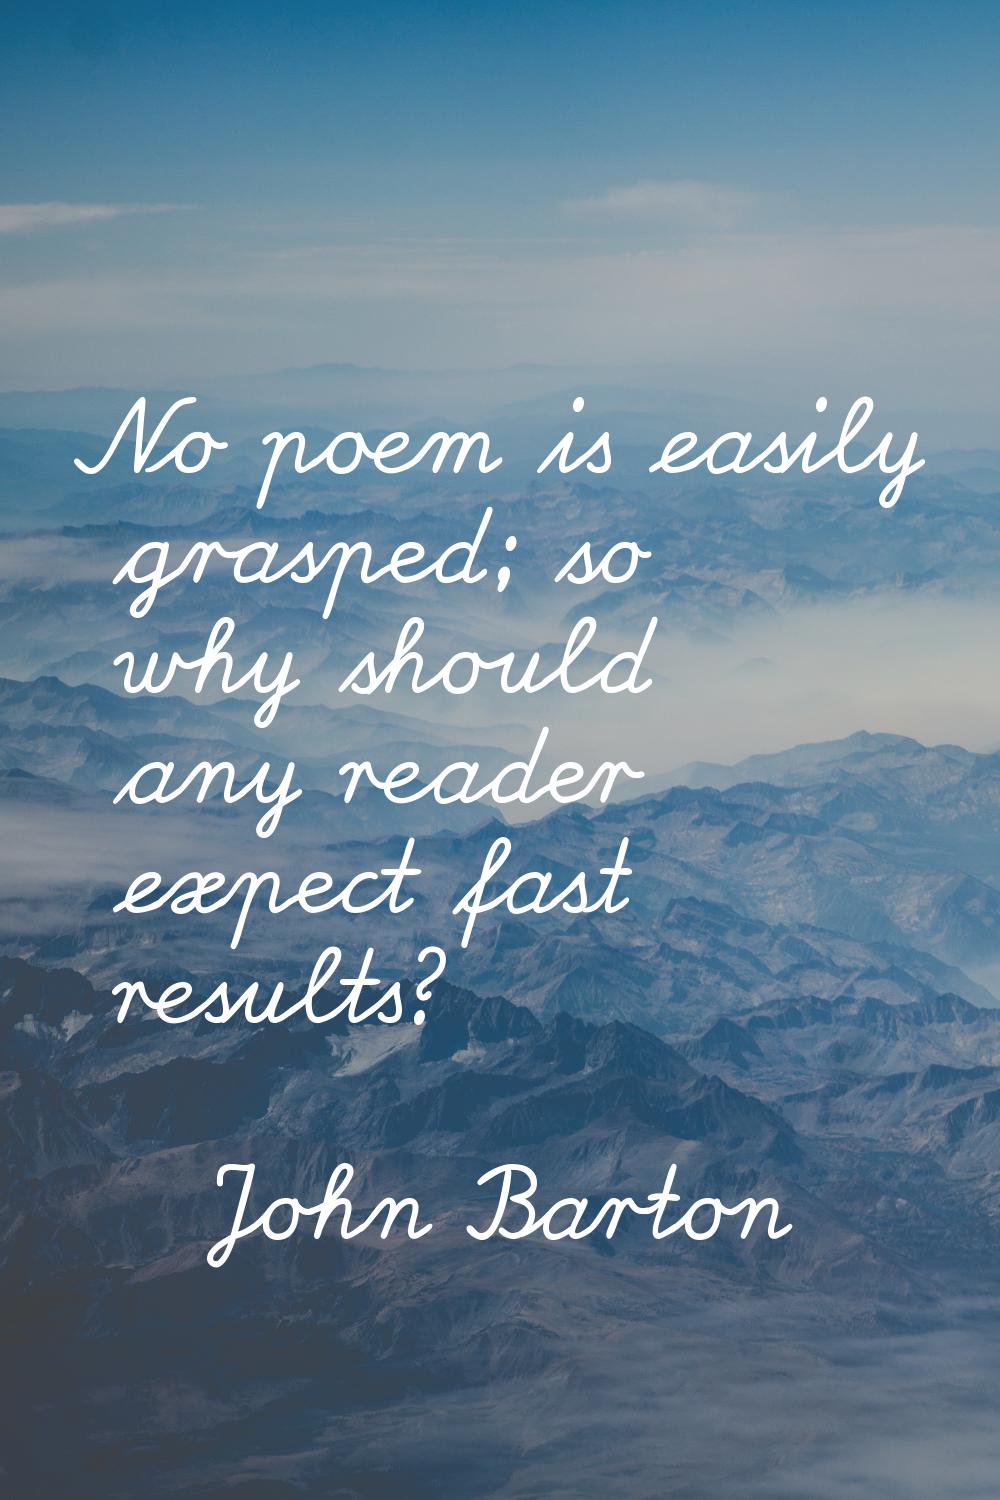 No poem is easily grasped; so why should any reader expect fast results?